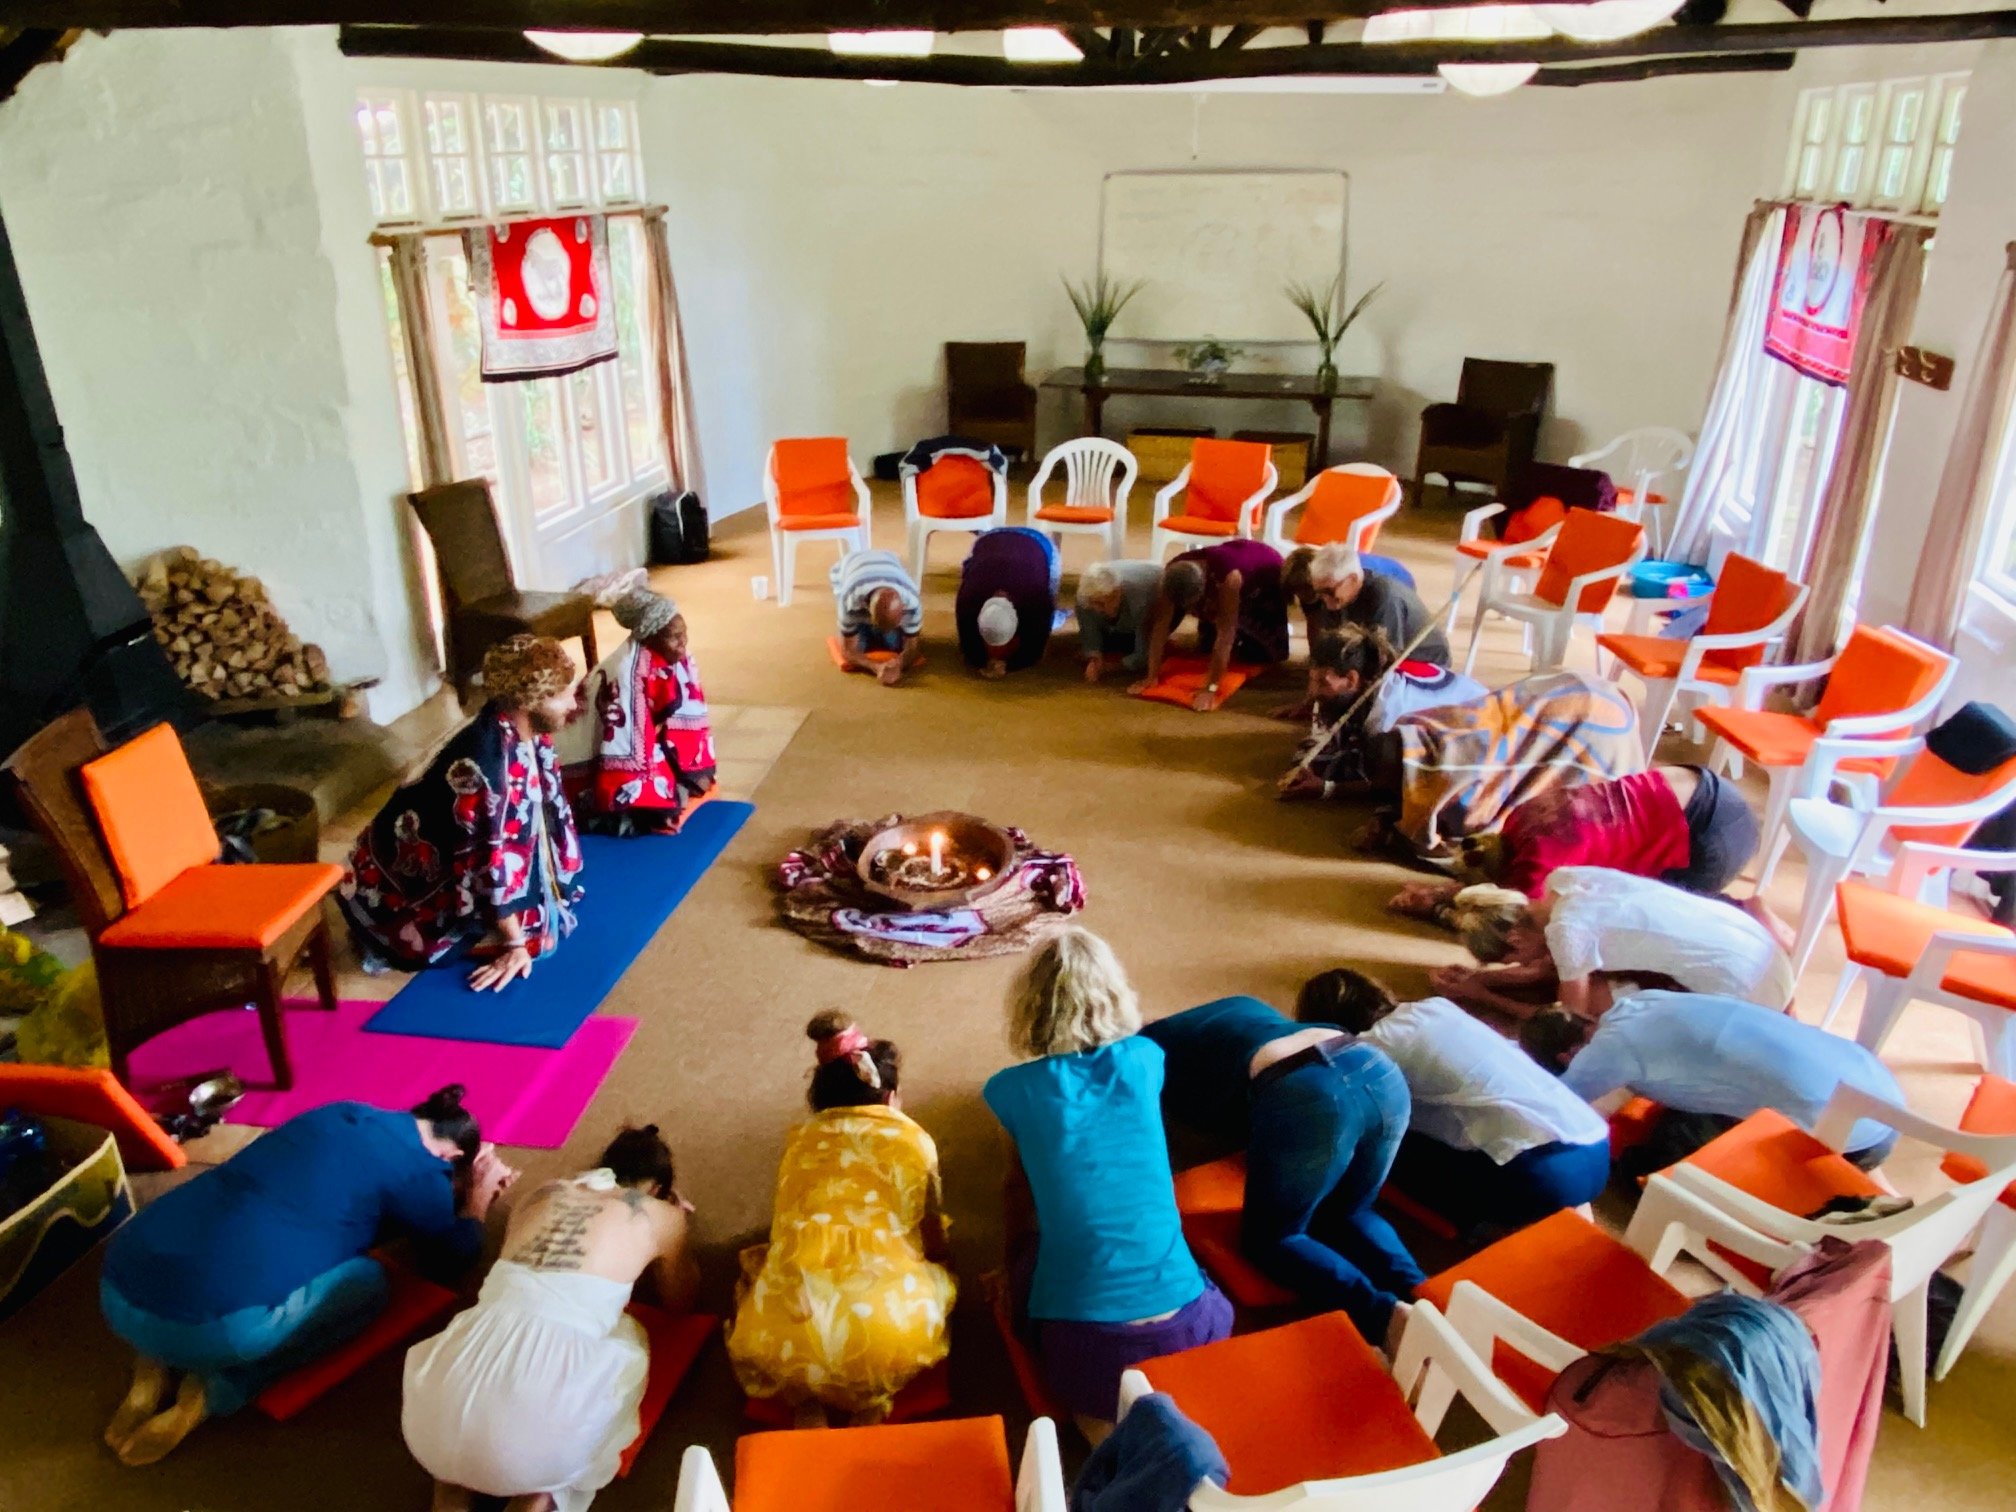 Participants at an 'Ubuntu retreat' in South Africa in front of the earth altar